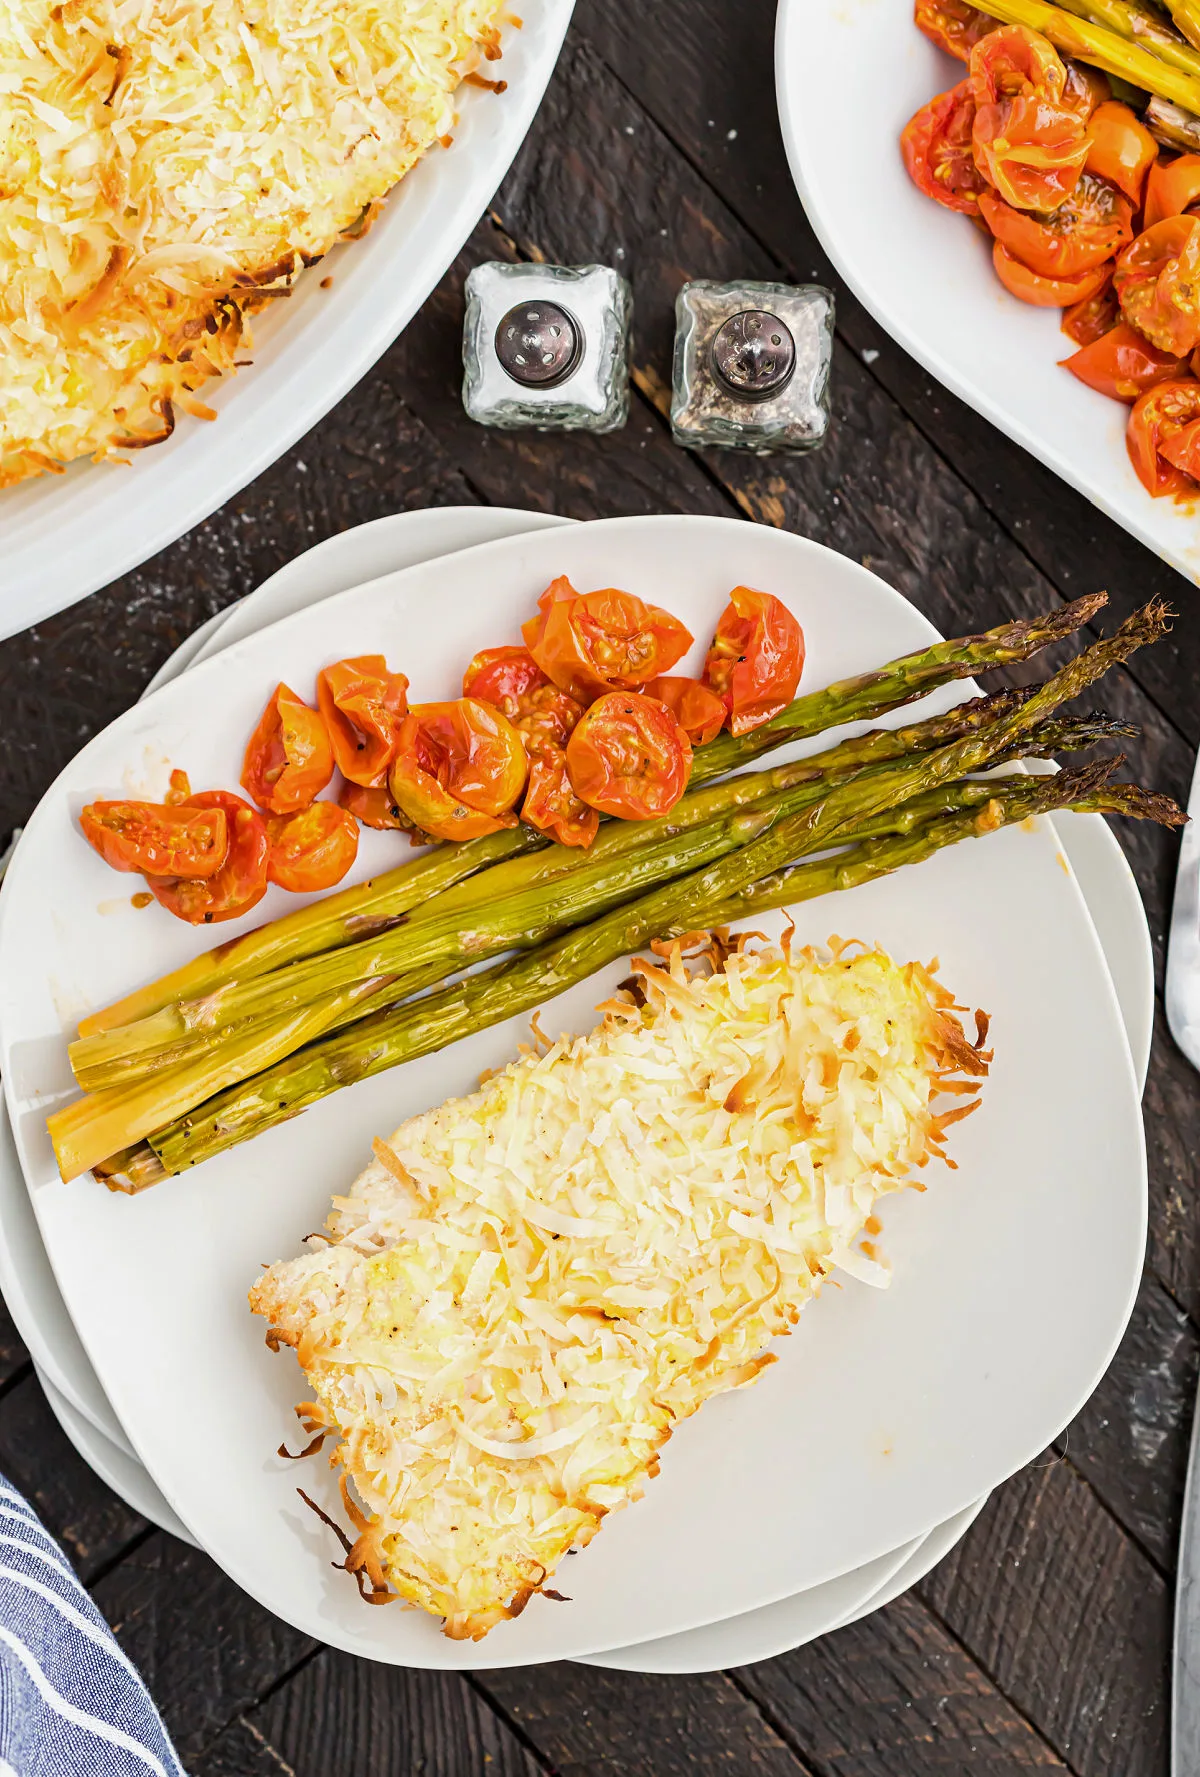 Coconut chicken on a dinner plate with roasted tomatoes and asparagus.